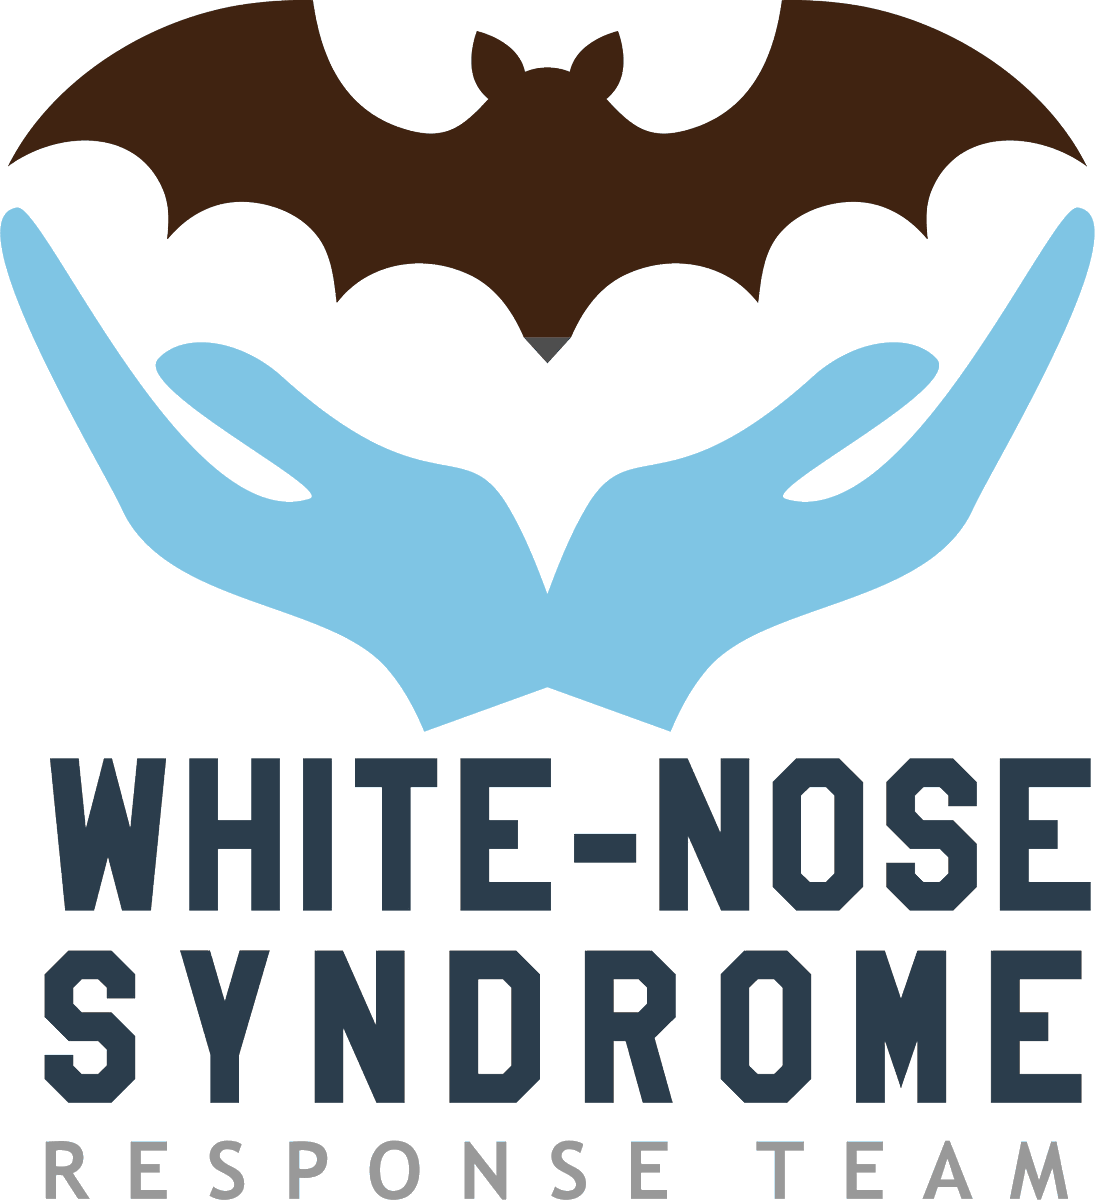 Enter the White Nose Syndrome Response Team, an effort by the U.S. Fish & Wildlife Service to form a united front against WNS. Teams of scientists & researchers are working around the clock to get a handle on WNS & find a cure for North American bats 9/